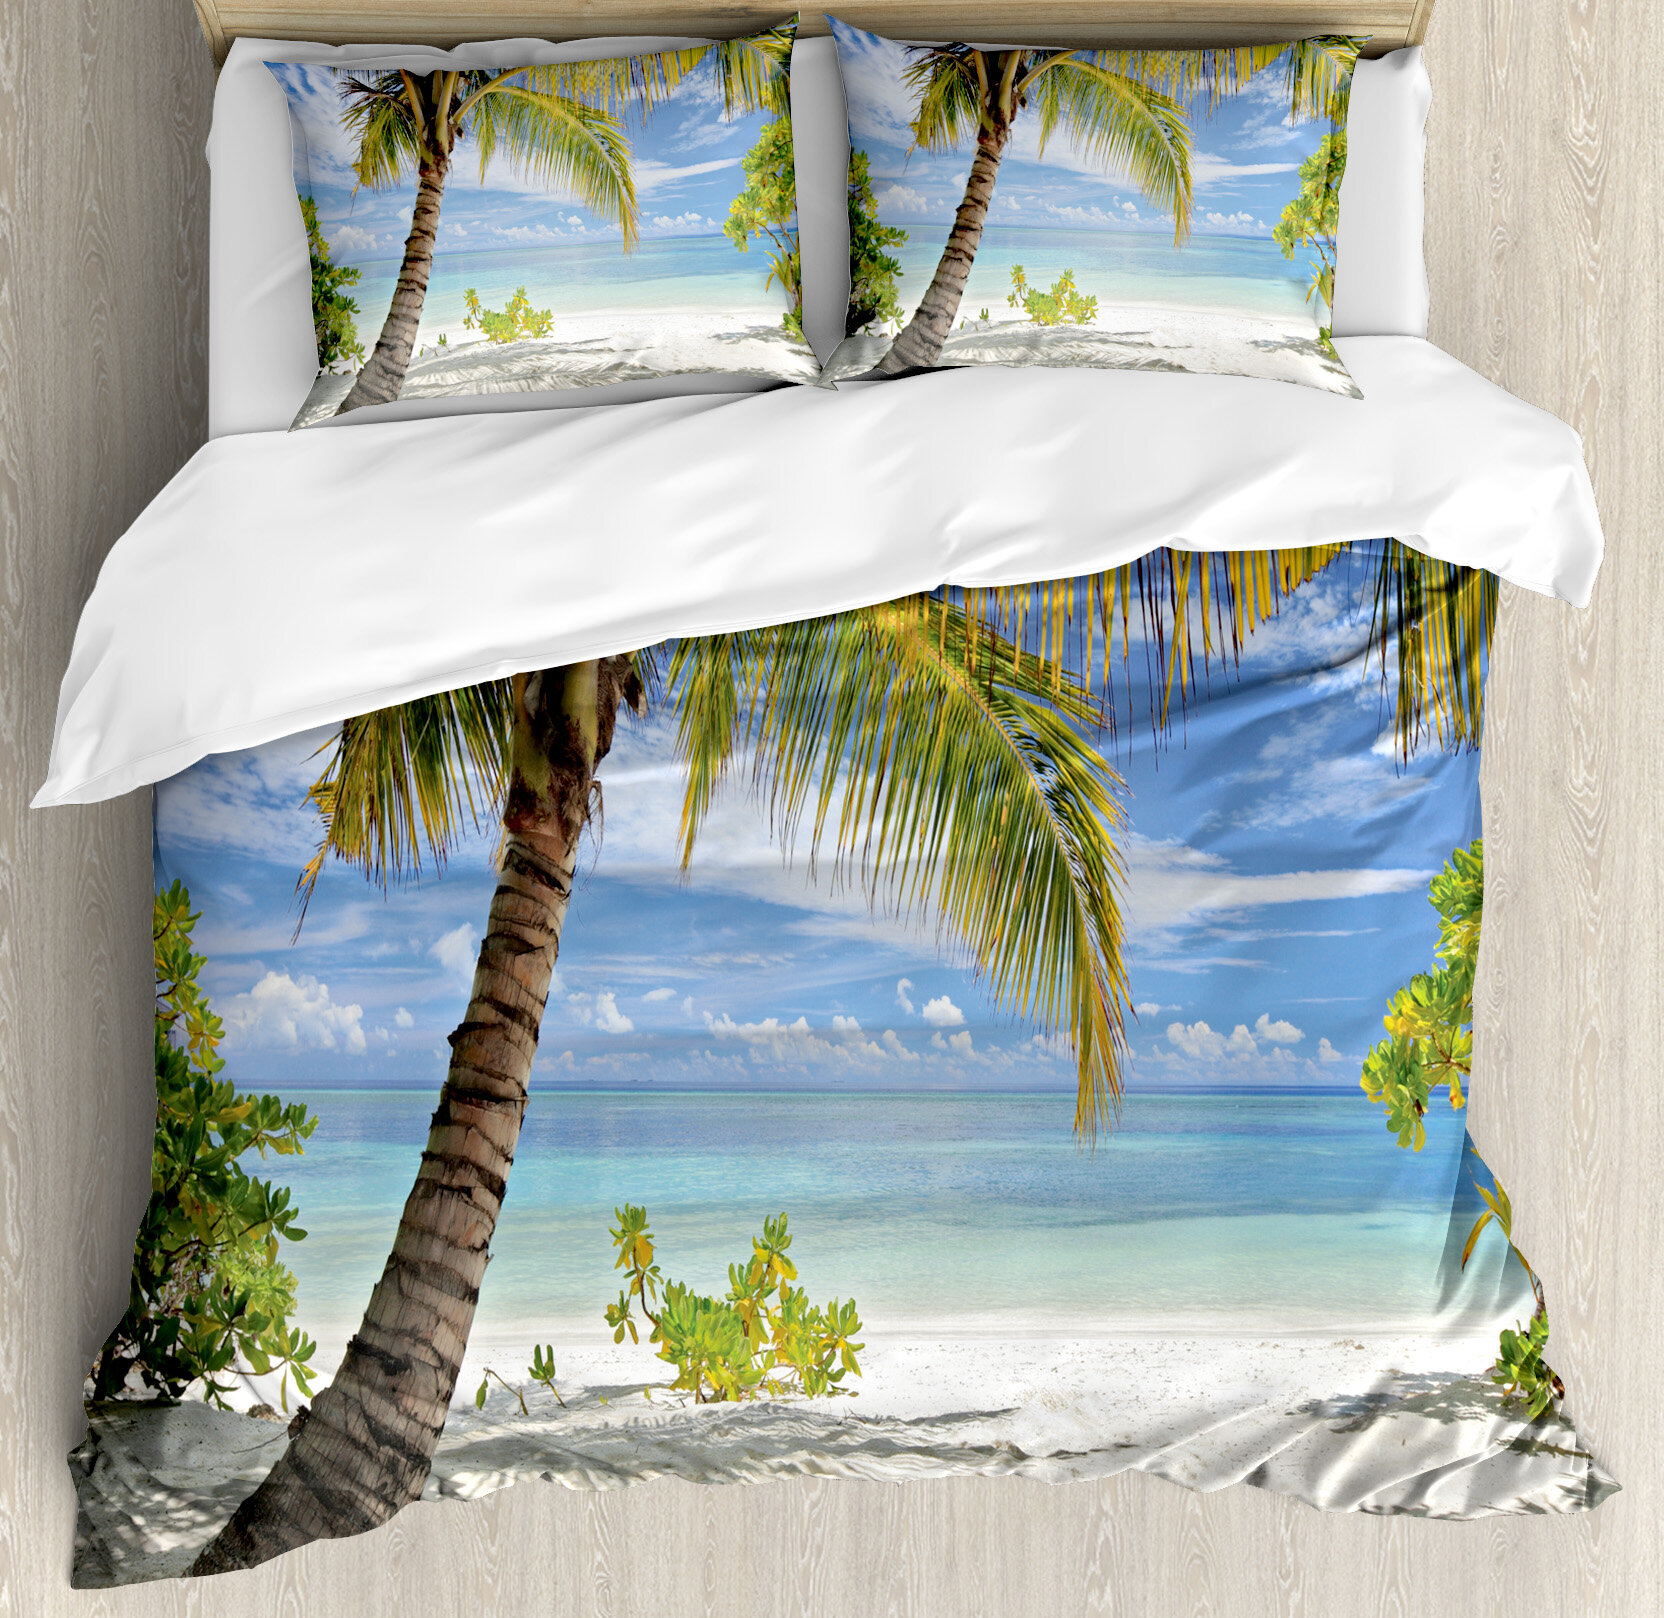 East Urban Home Scenery Tropical Sandy Beach With Palm Trees